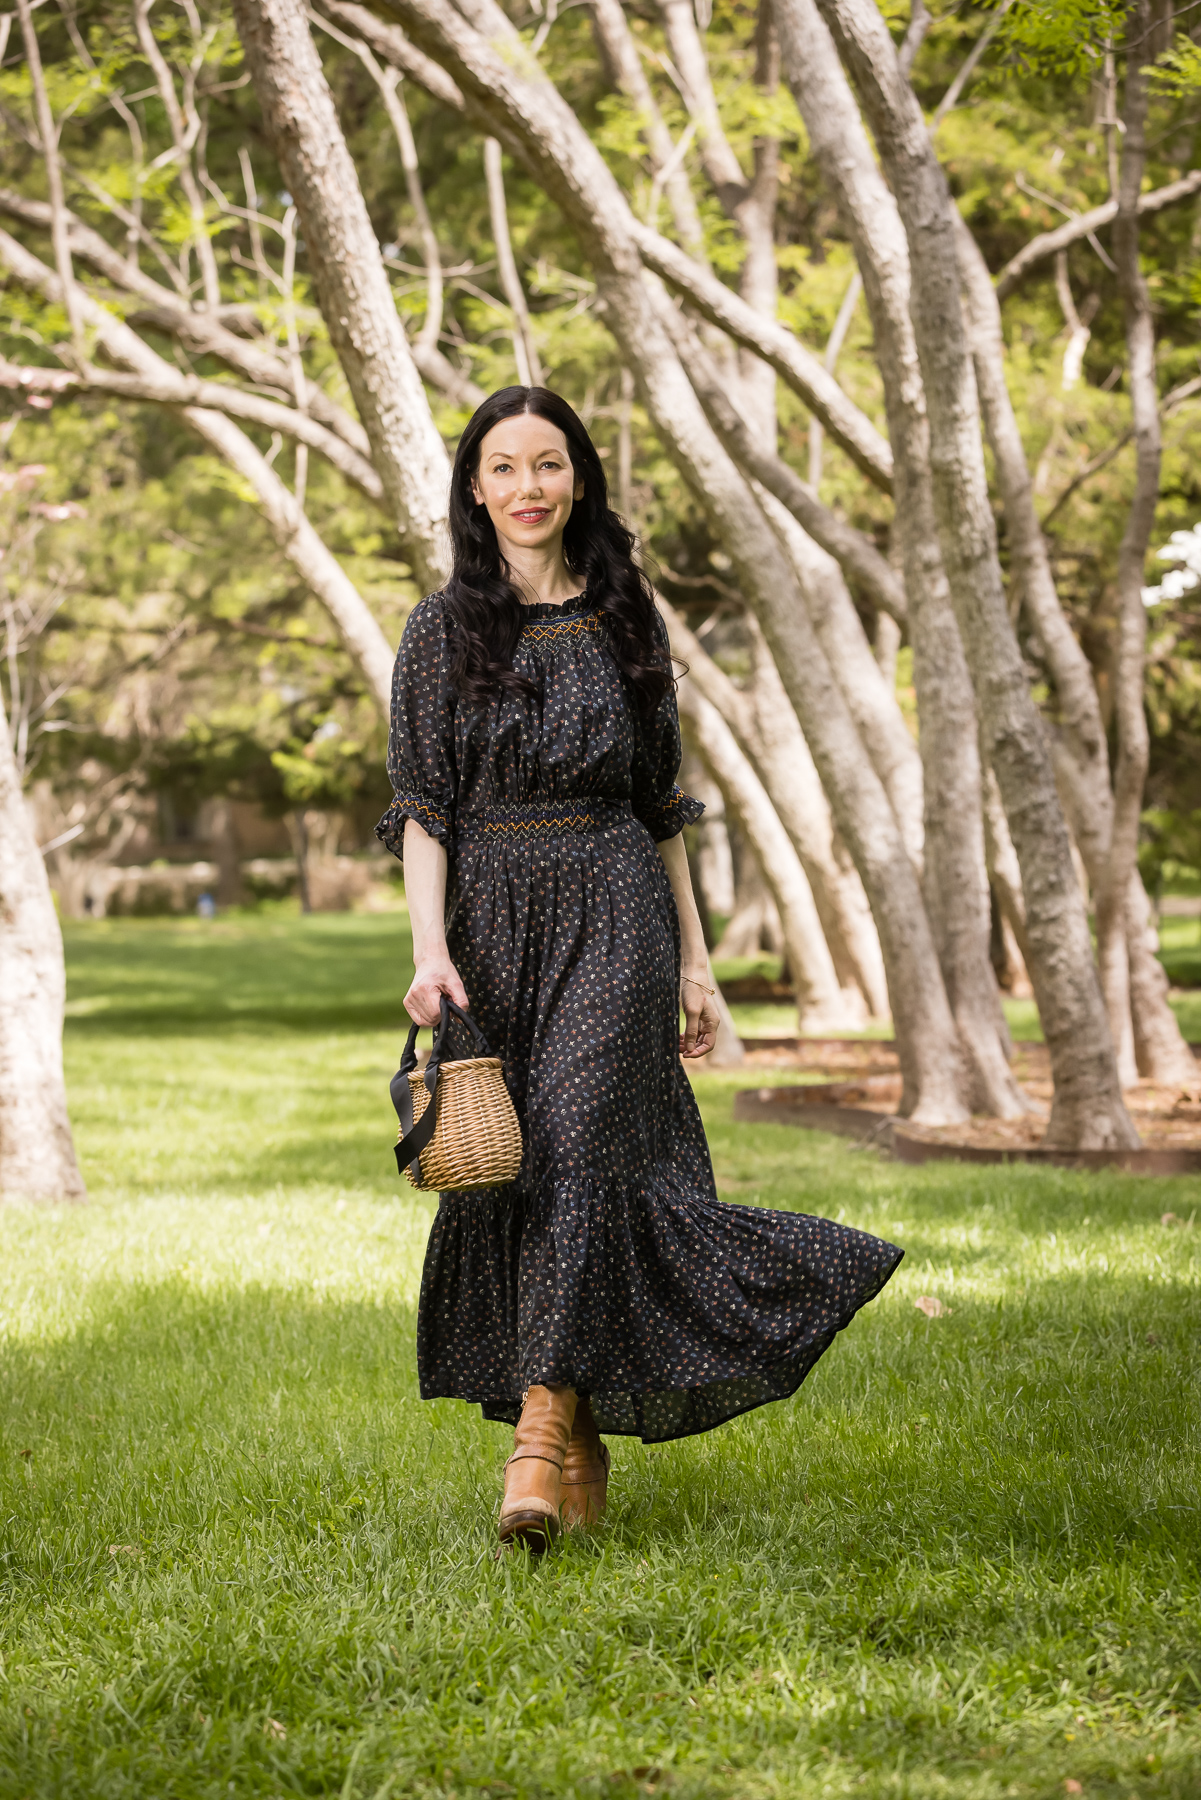 Black Floral Doen Prairie Dress | Prairie Dress by popular Dallas fashion blog, Pretty Little Shoppers: image of a woman walking outside on some grass under some trees and wearing a black Down prairie dress, tan boots, and holding a woven handbag.